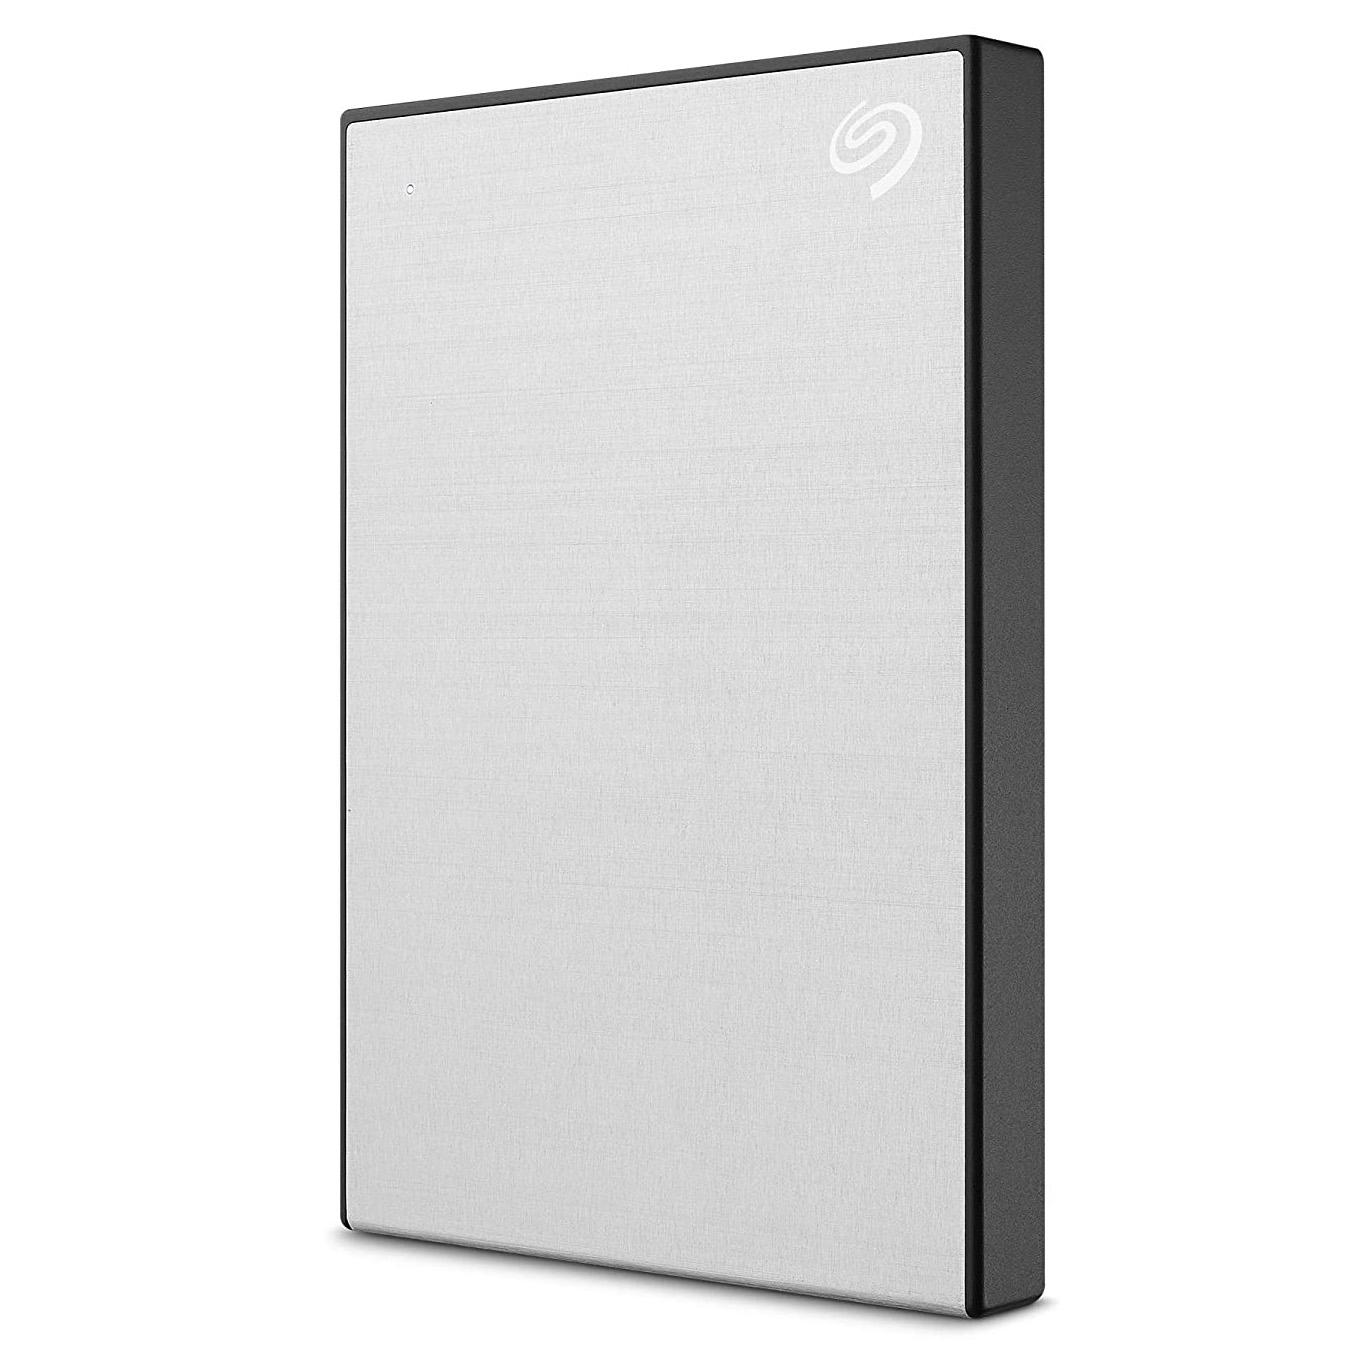 Seagate One Touch 1TB External Hard Drive HDD for $46.99 Shipped